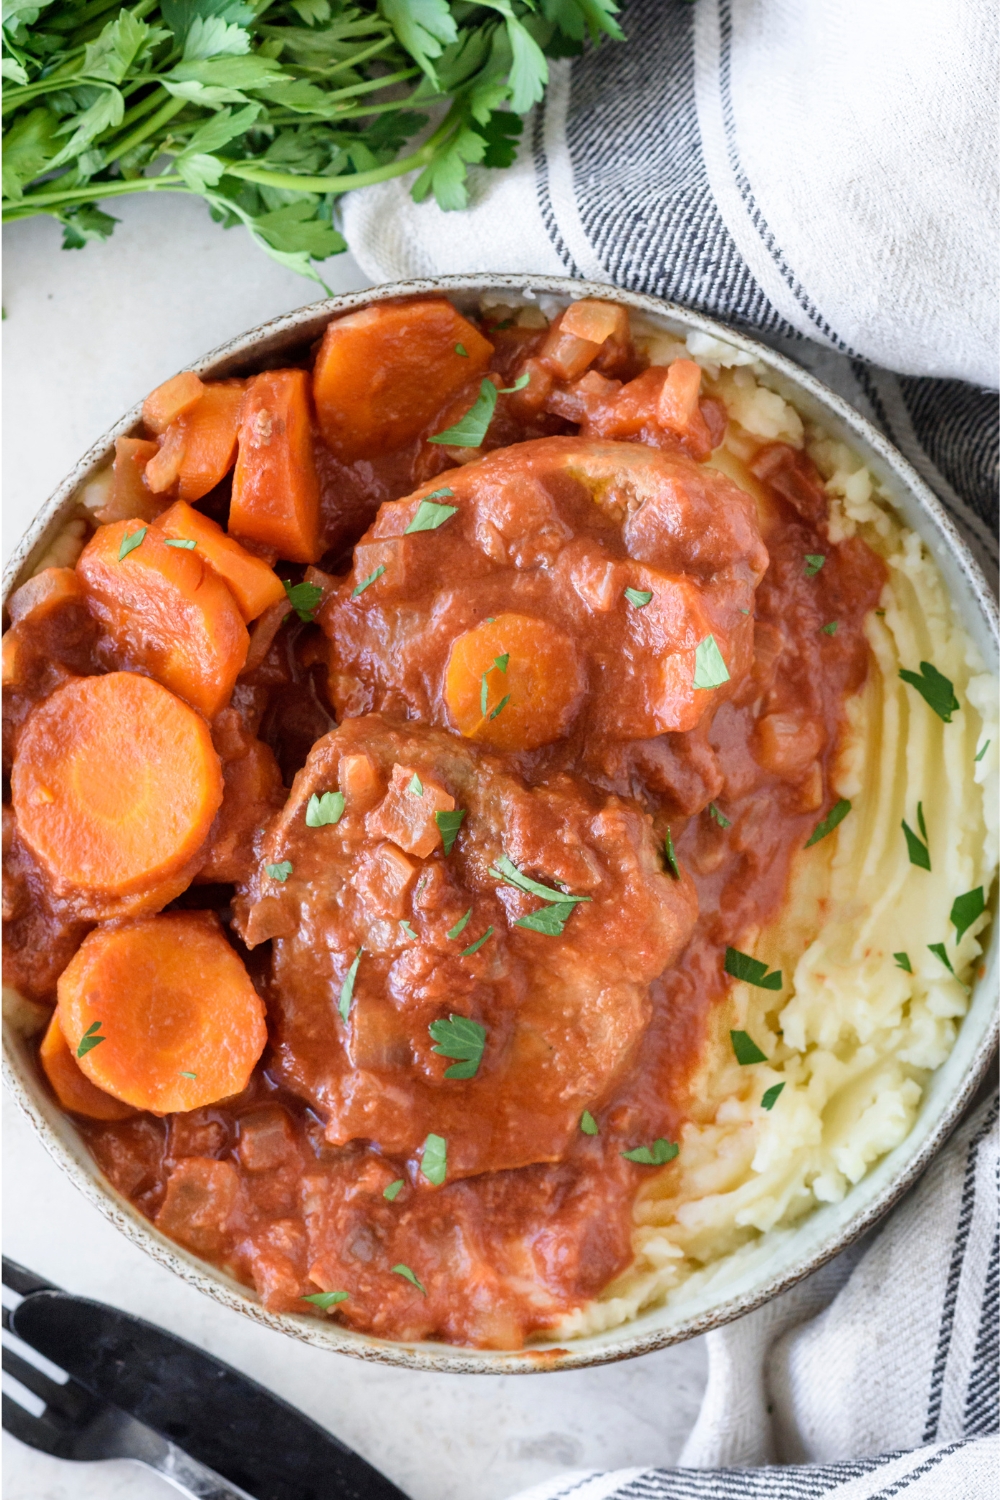 A plate filled with slow cooker swiss steak covered in a red gravy with sides of sliced carrots and mashed potatoes, all covered in a garnish of fresh herbs.